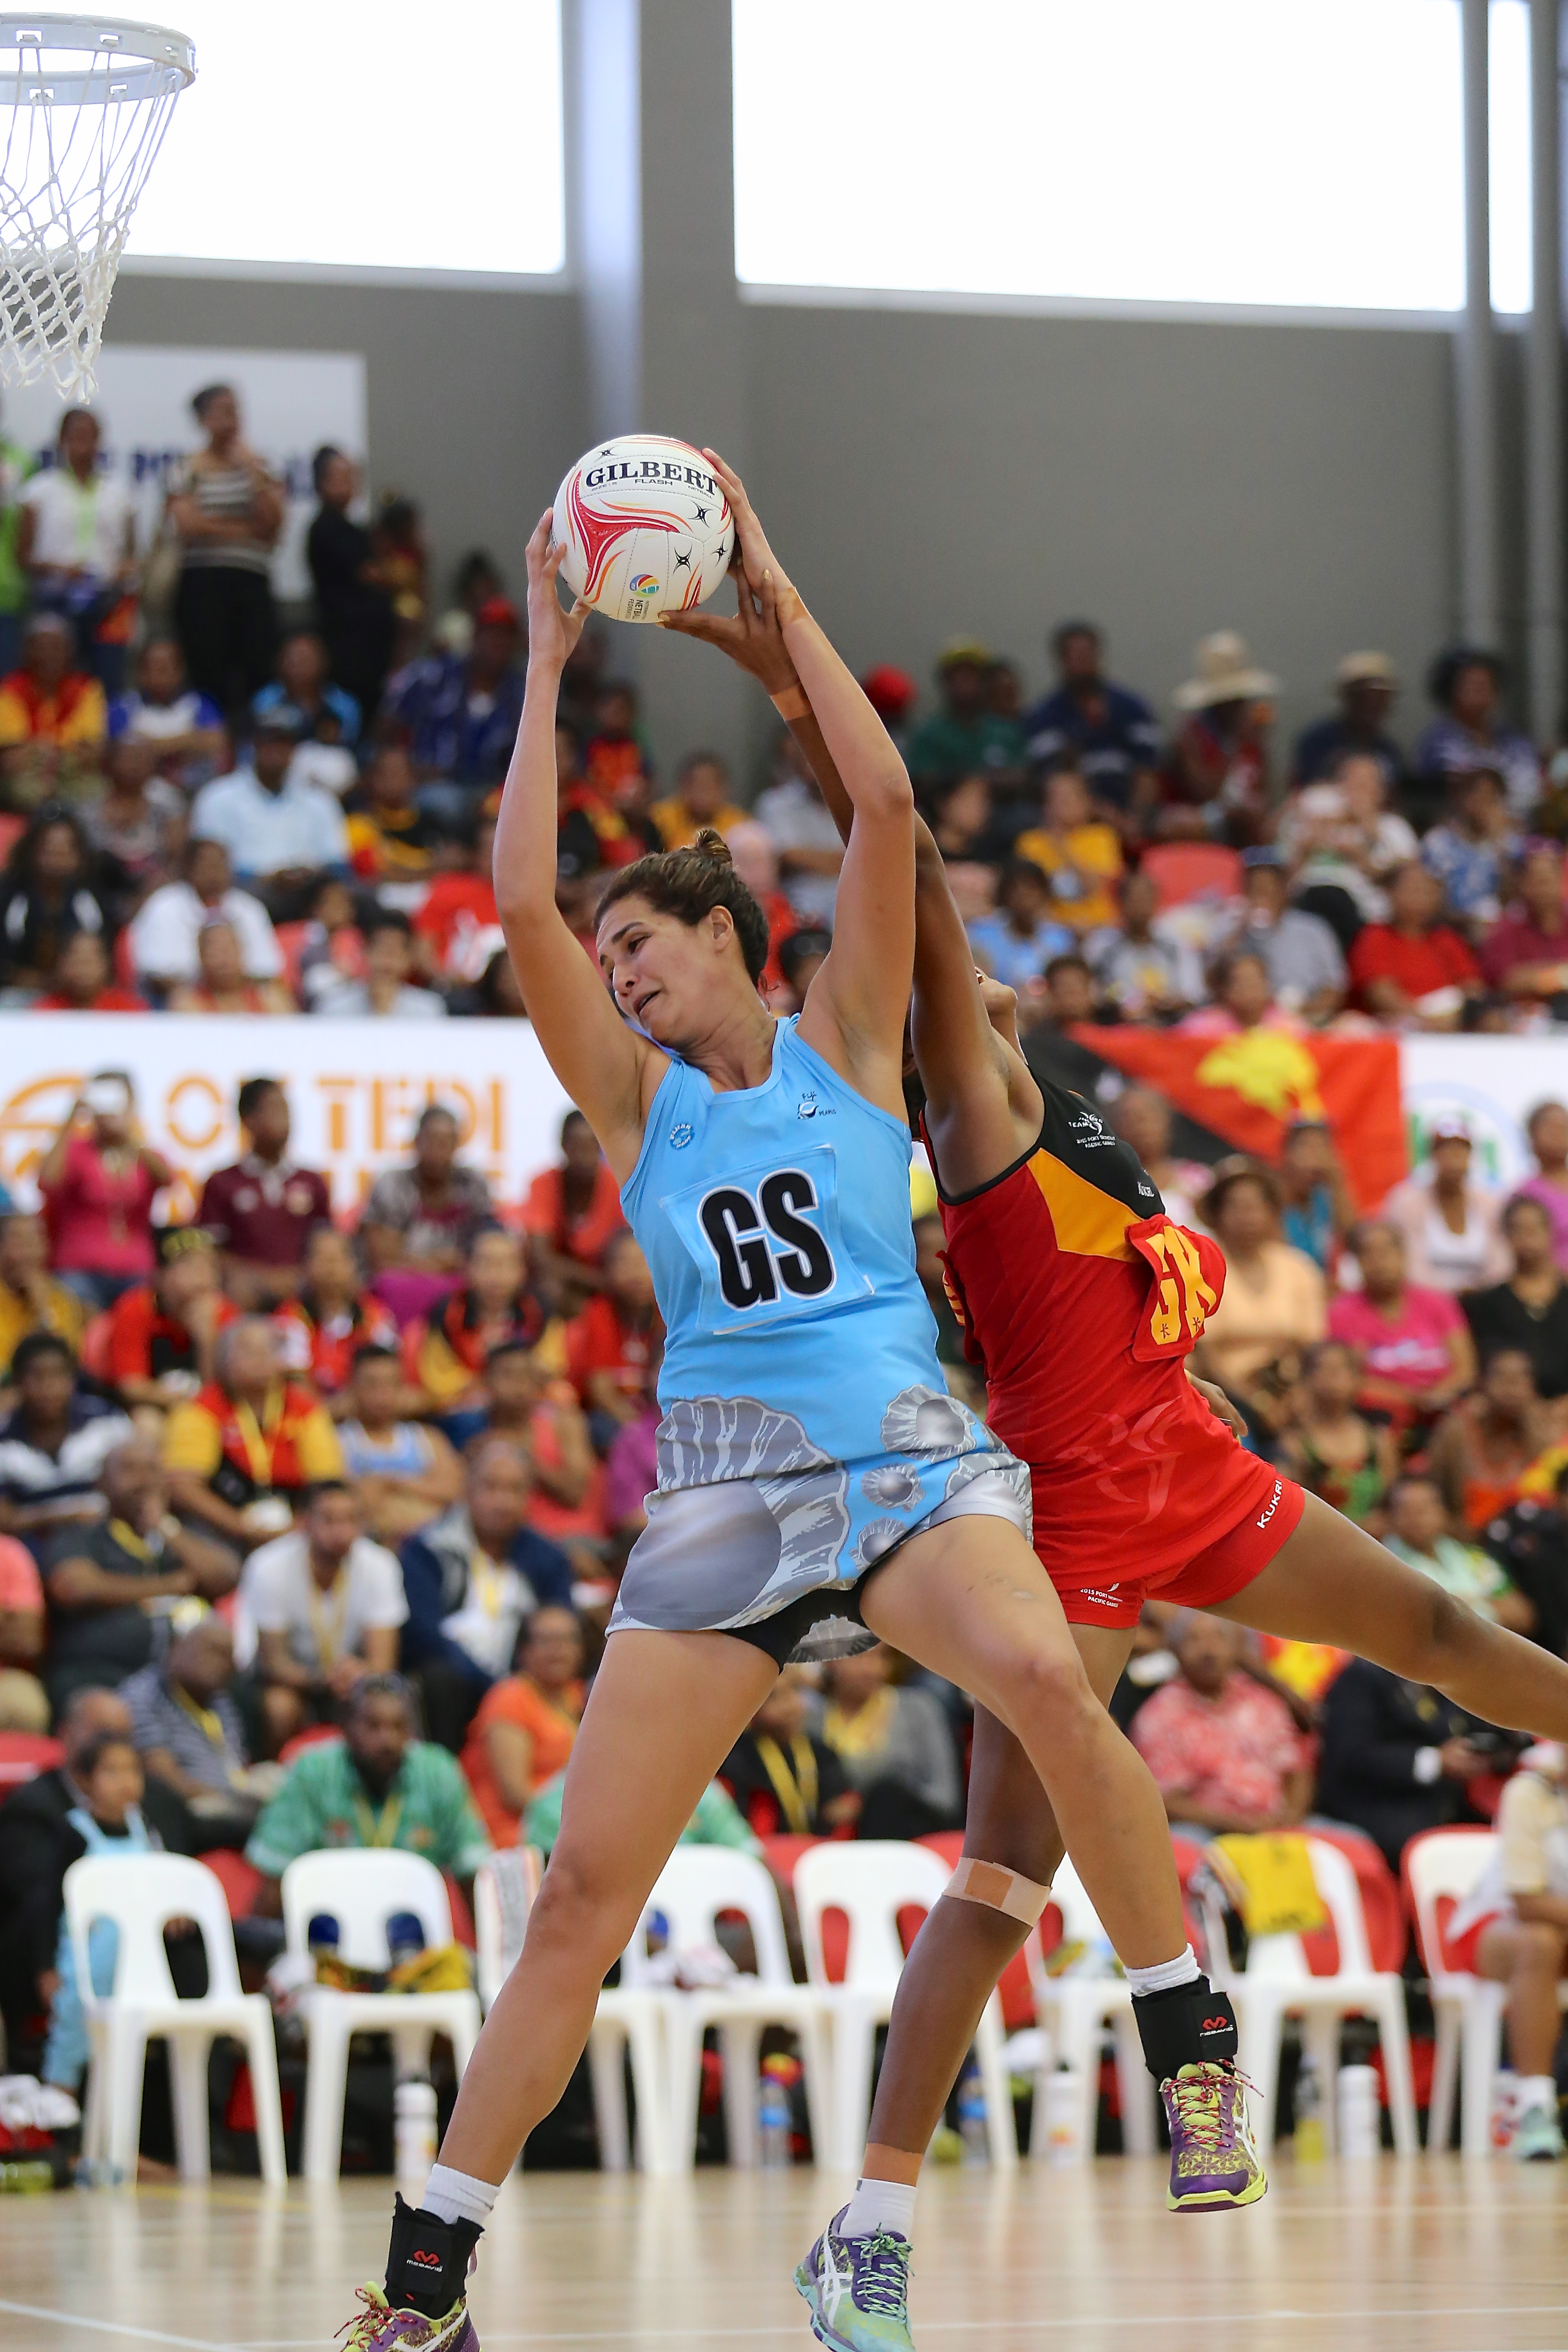 Taraima Mitchell Led Fiji To A Netball Gold Medal On Saturday. Photo By Susie Pini - Netball, Transparent background PNG HD thumbnail